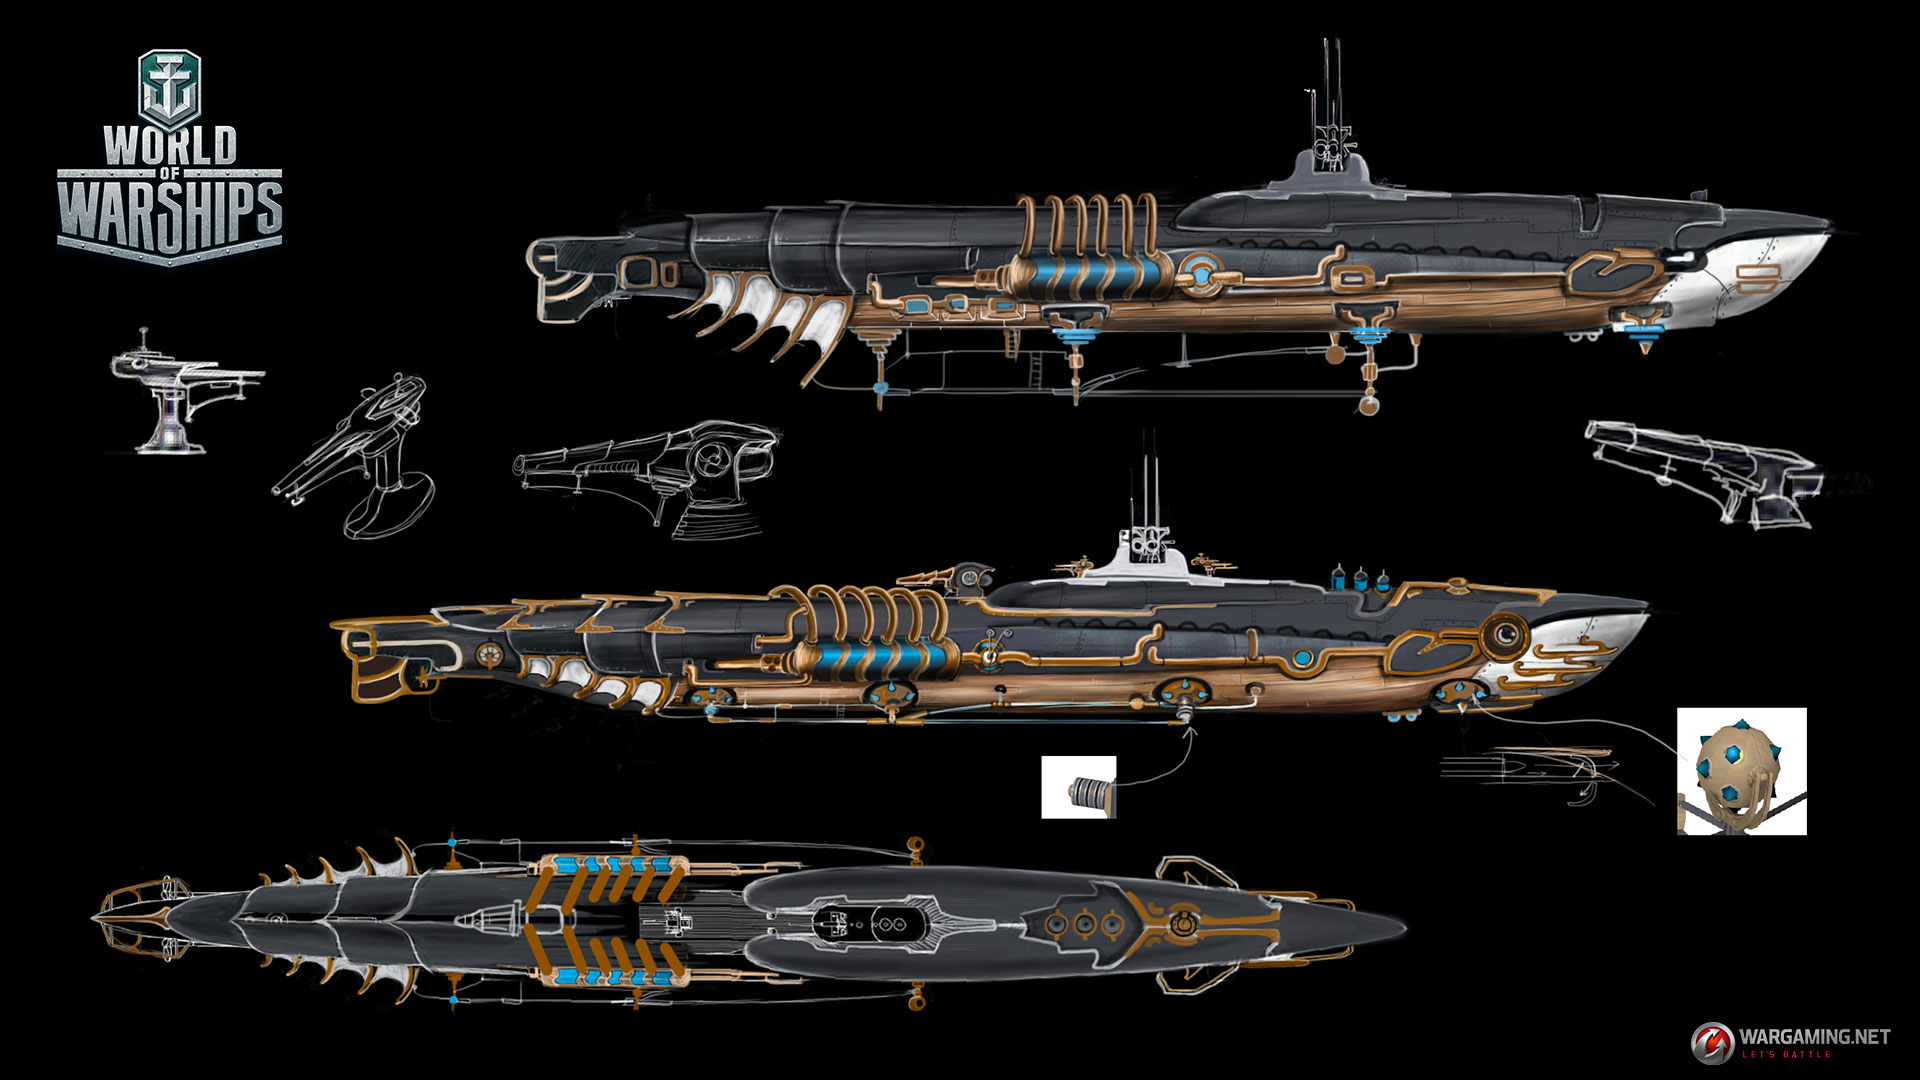 WG_WOWS_SPB_Halloween_Ships_workstages_04_1